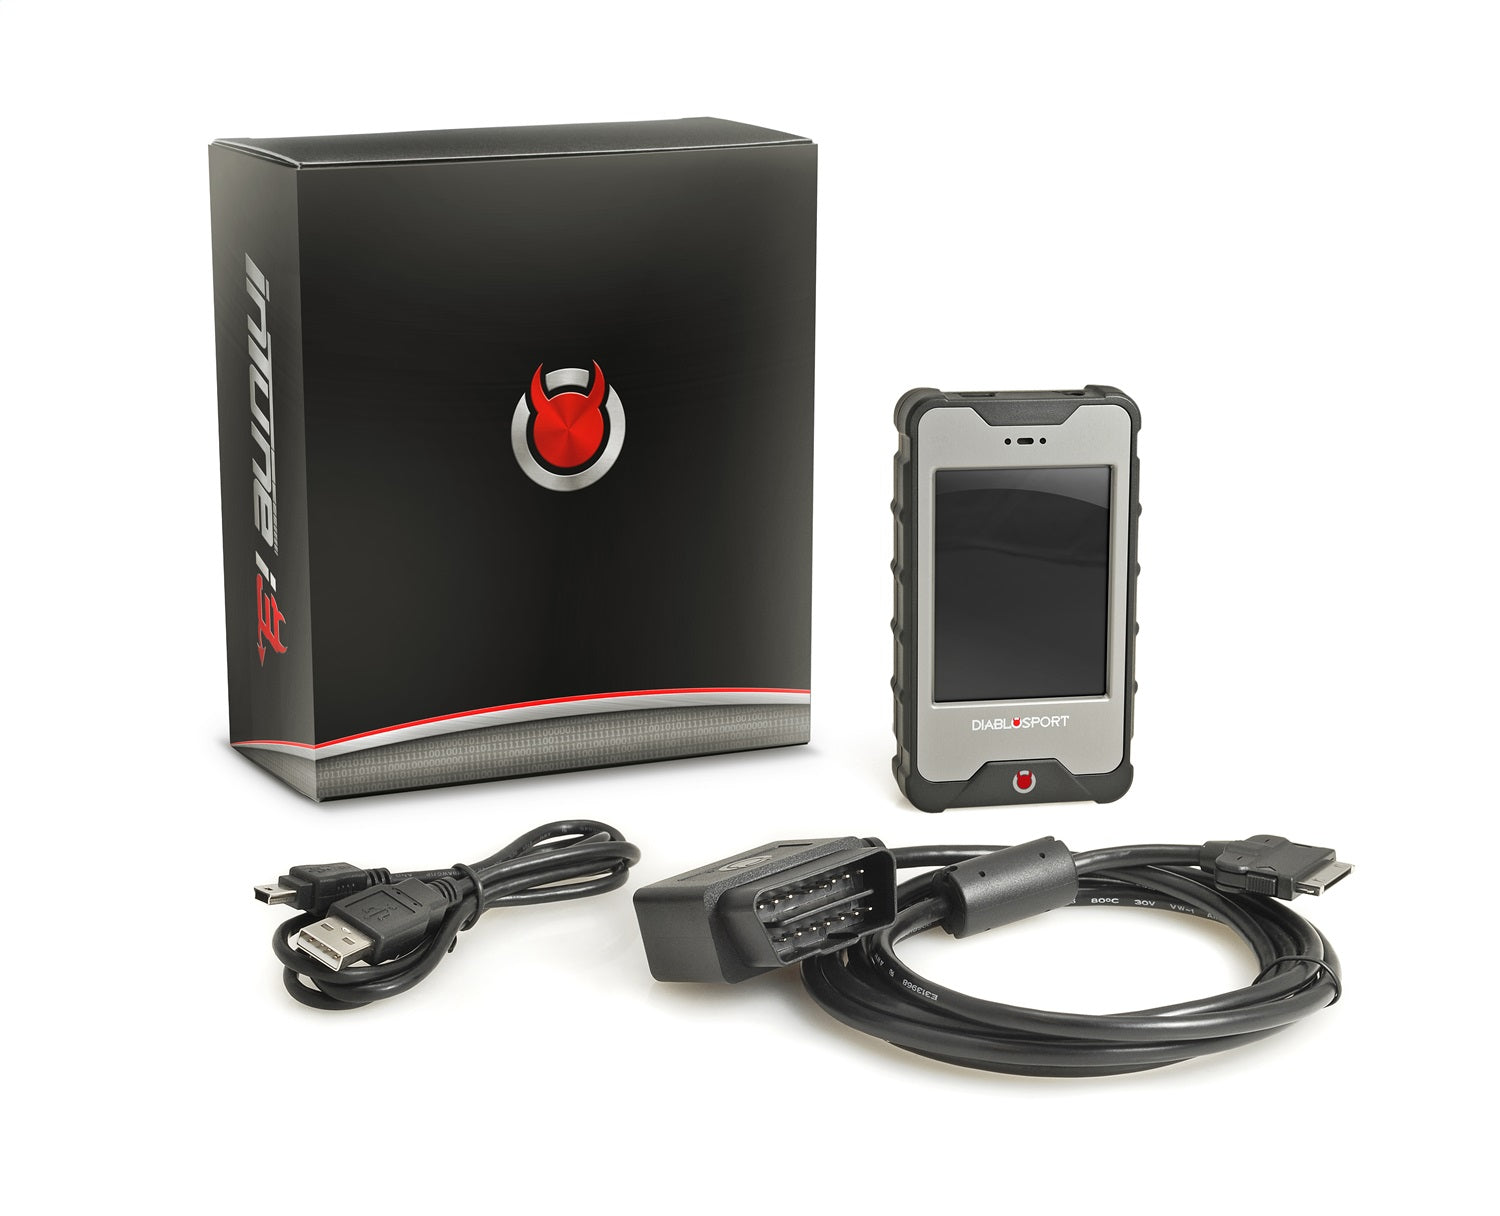 Intune 3 for dodge vehicles 50-state